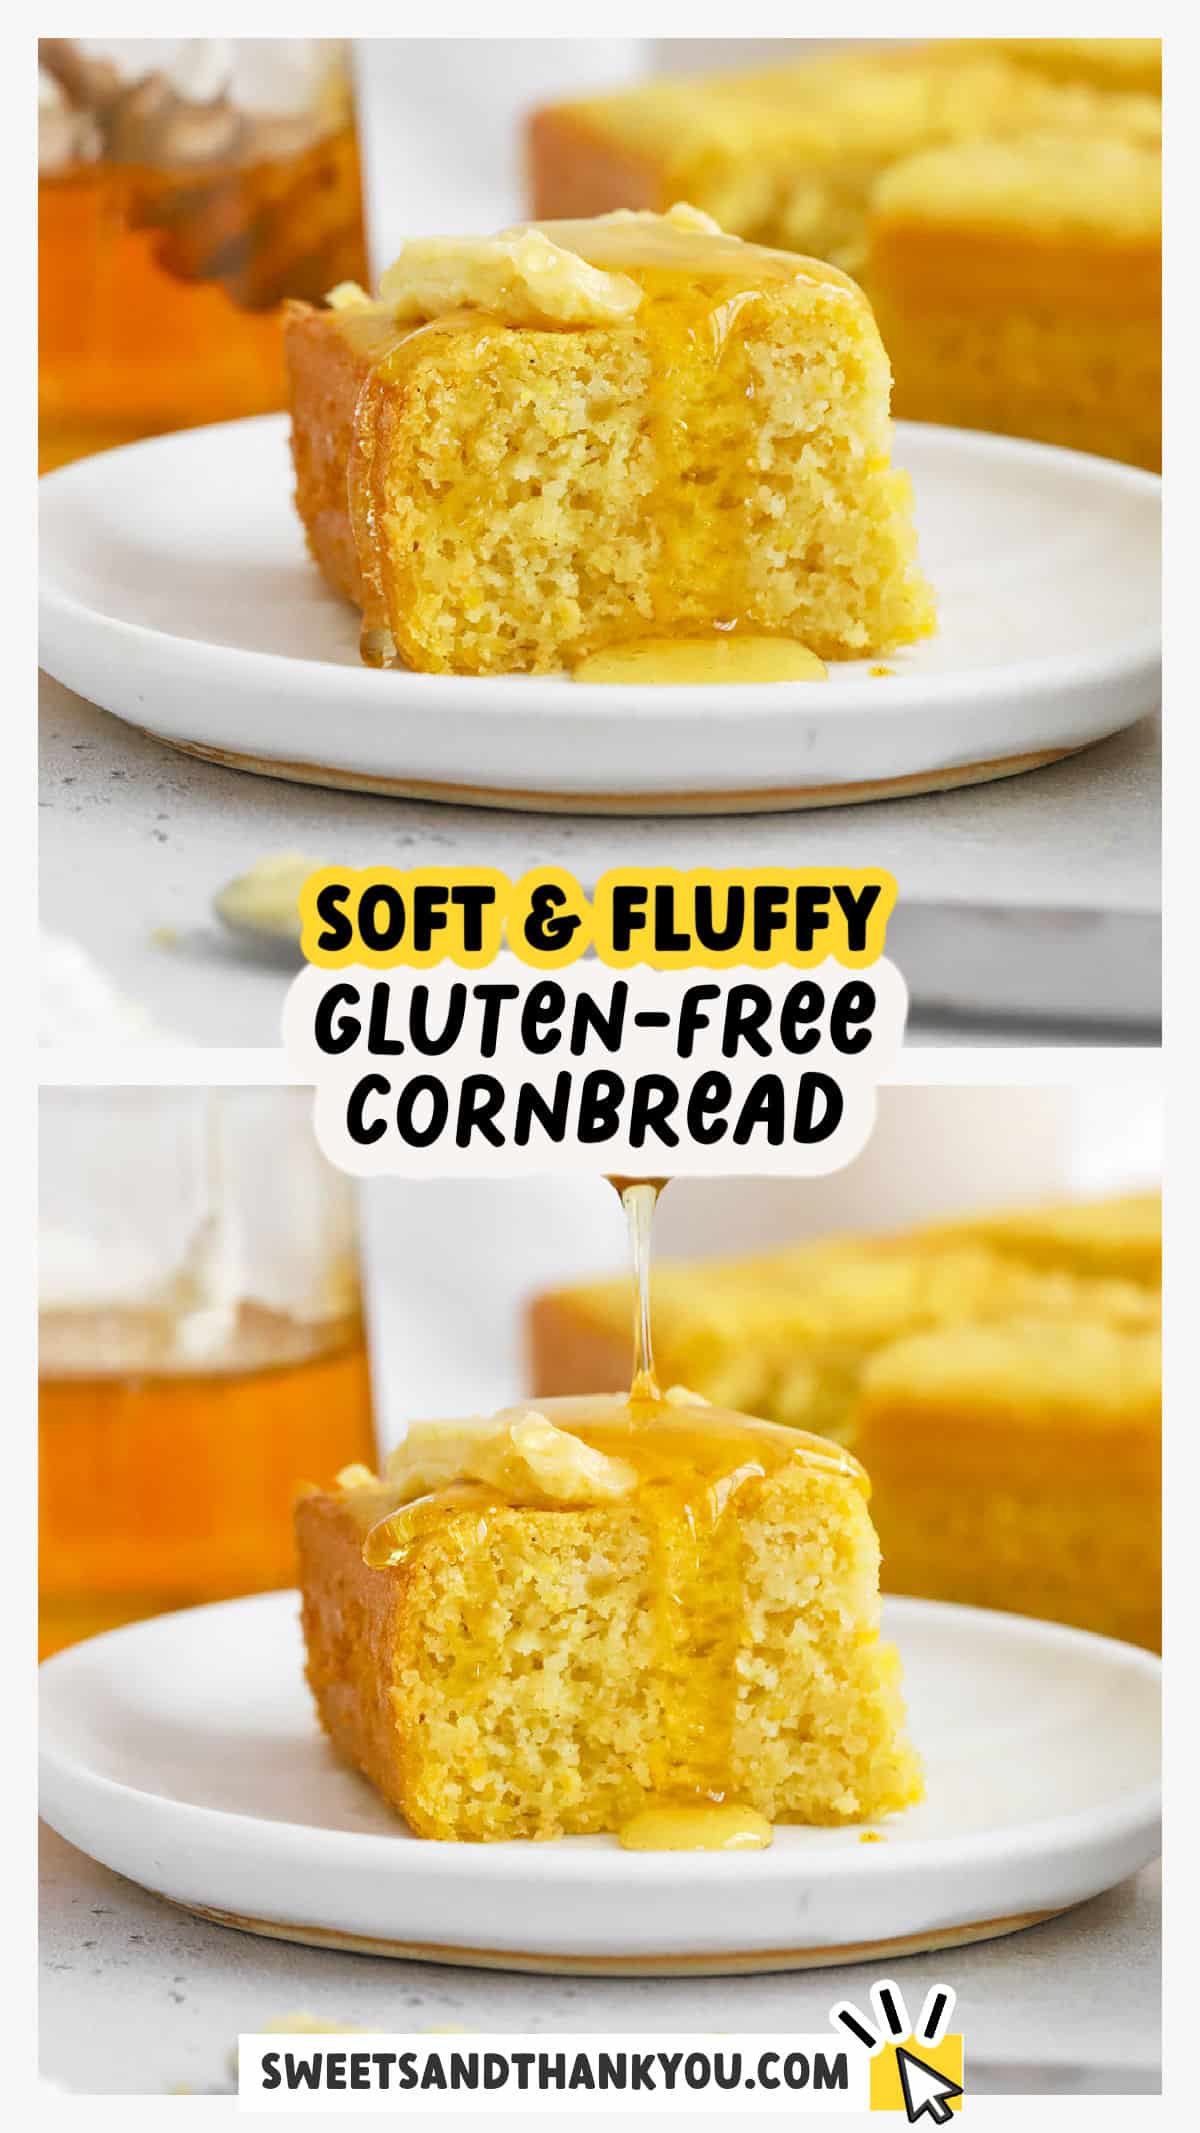 This is the BEST gluten-free cornbread recipe we've ever tried. Fluffy, moist, perfectly sweet & easy to make! Now, you can make moist gluten-free cornbread without a mix! This easy gluten-free cornbread recipe mixes up in minutes, has a light, moist, fluffy texture (THE BEST TEXTURE!), and gently sweet flavor. It's the perfect side dish for chili, soup, bbq, salads, and more! 